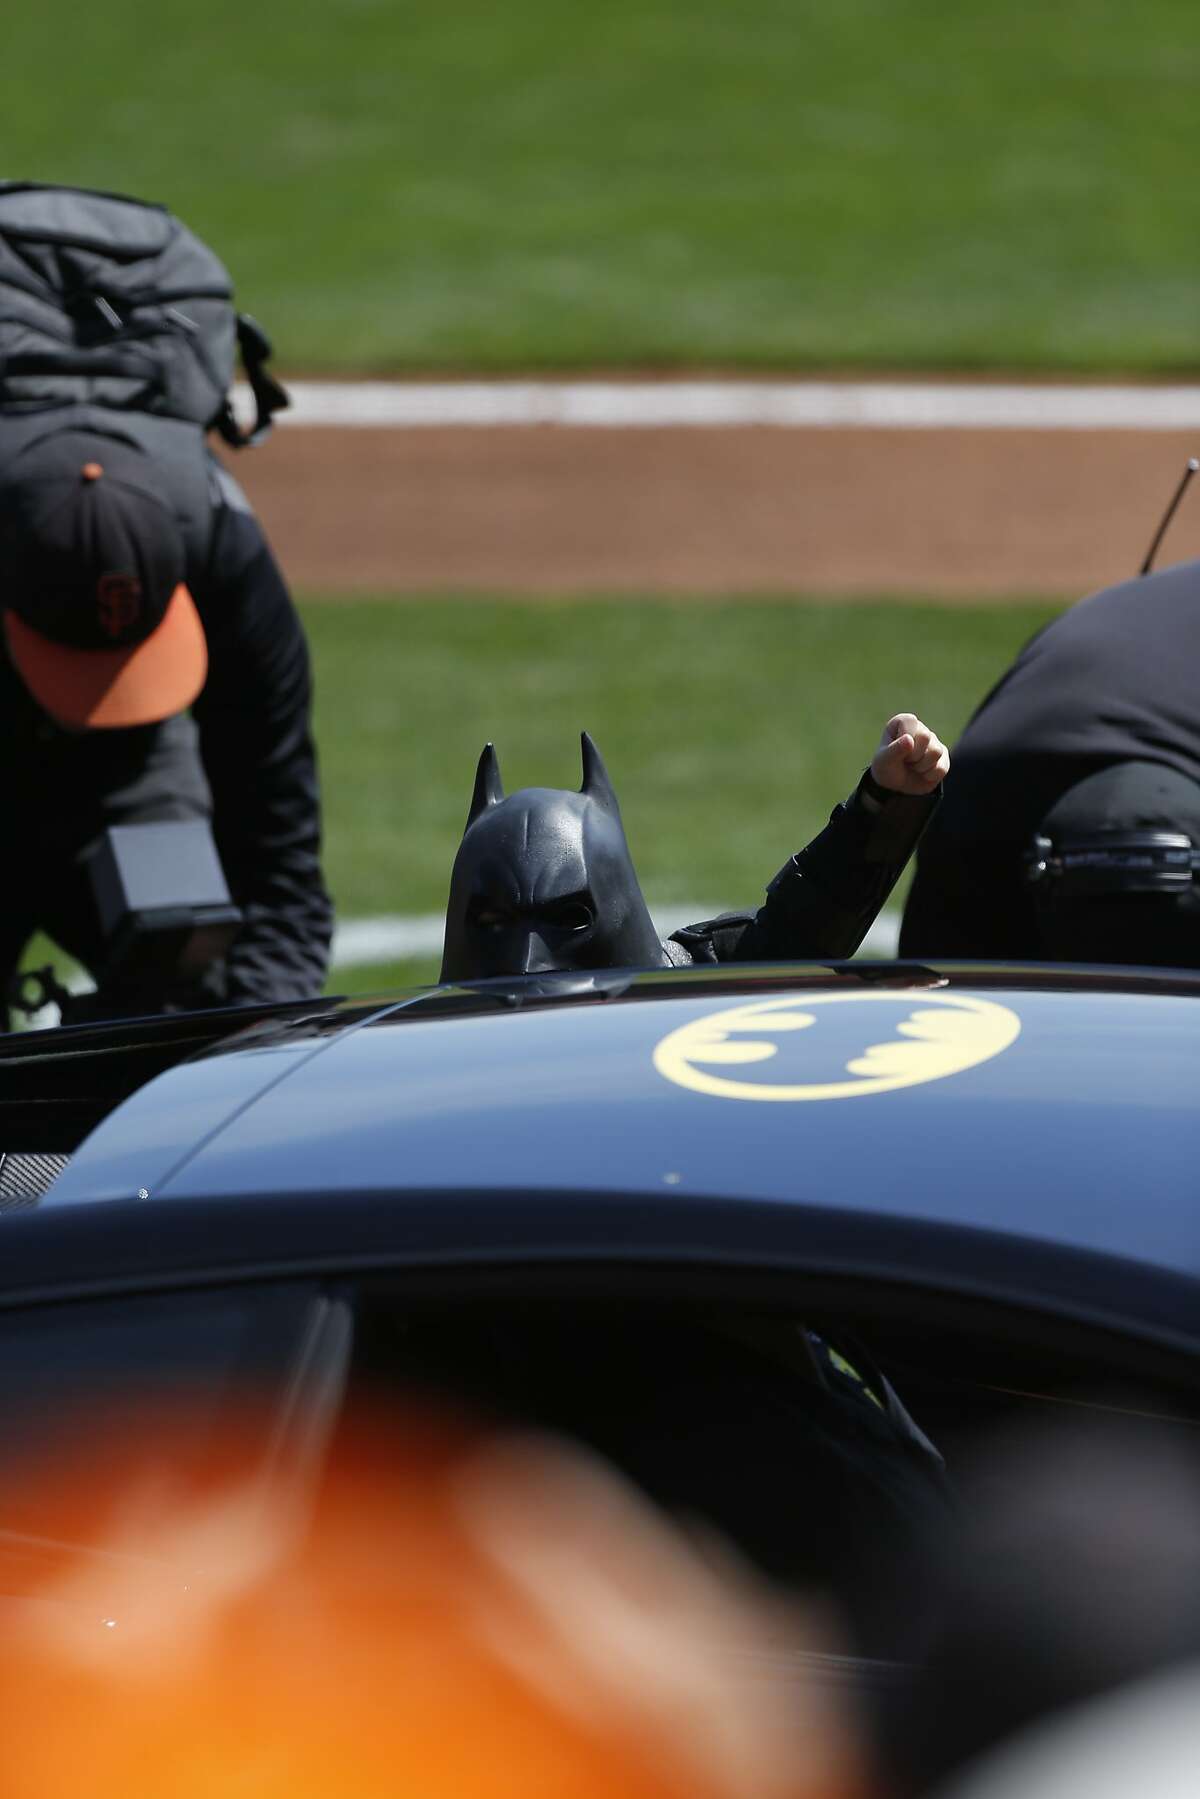 Batkid emerges from the Batmobile during opening ceremonies as the San Francisco Giants prepare to take on the Arizona Diamondback during their home opener at AT&T Park on Tuesday April 8, 2014, in San Francisco, Calif.